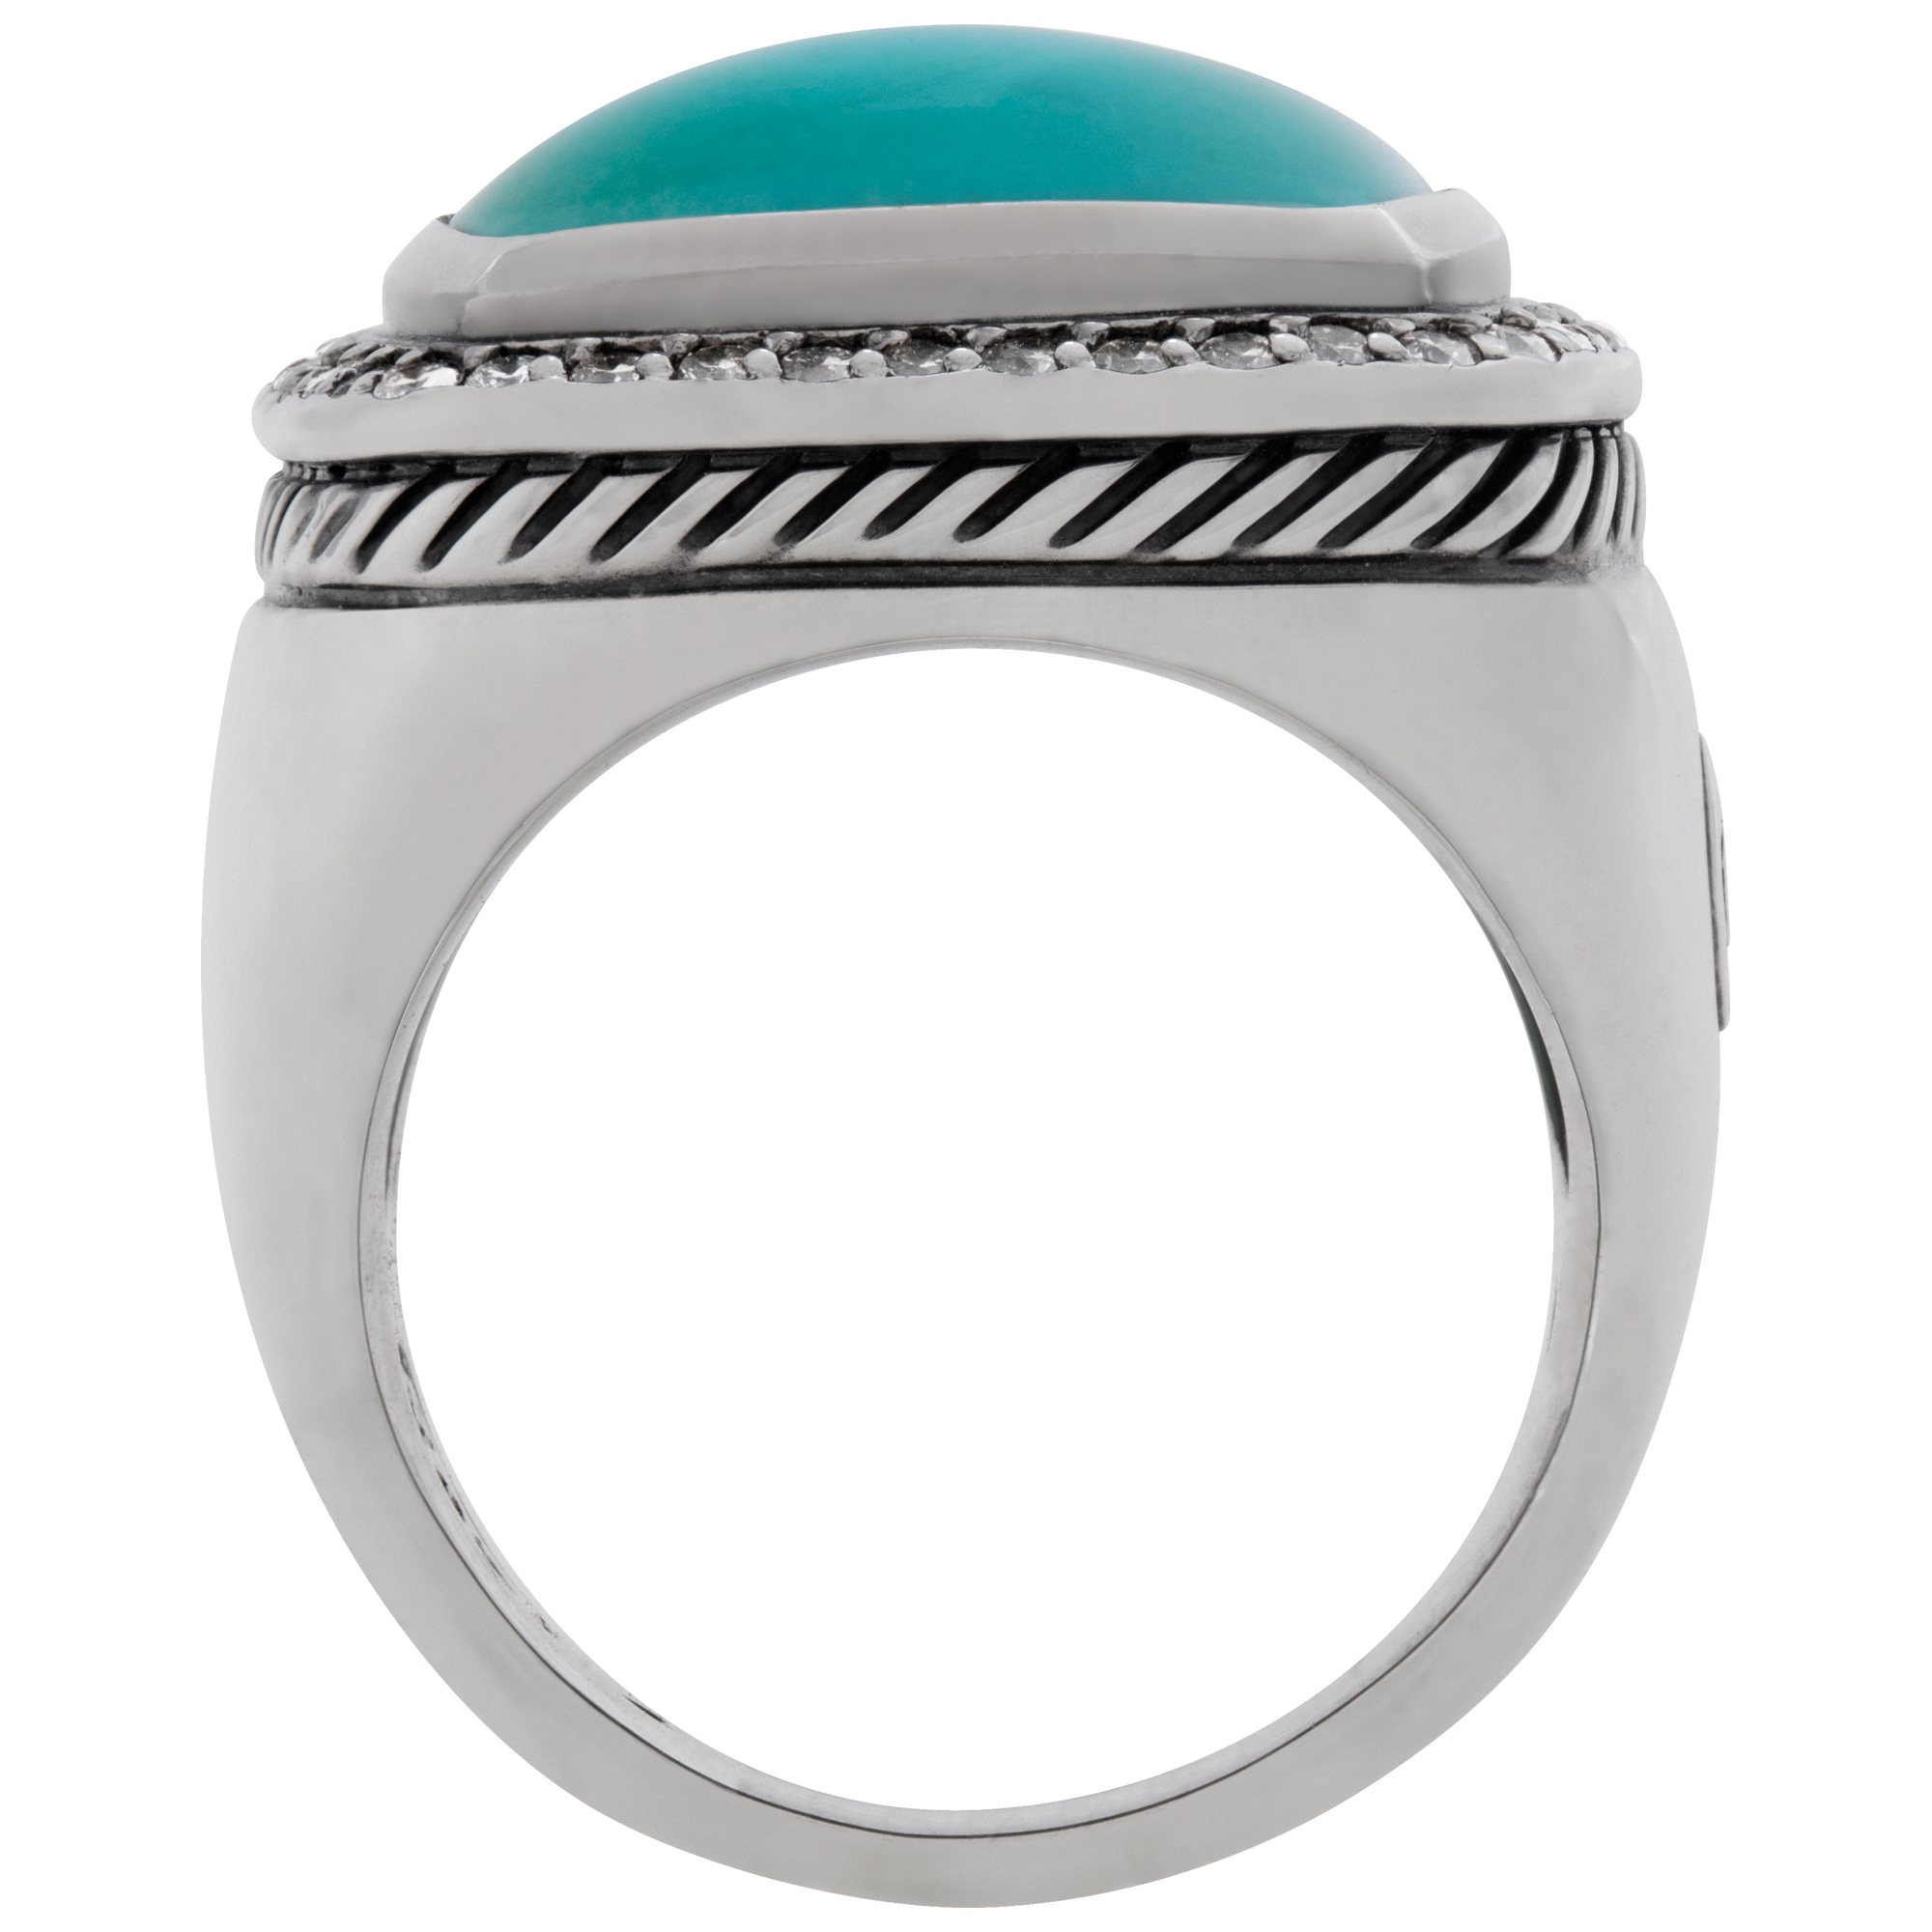 David Yurman Turquoise Albion ring in sterling silver ring with diamond accents image 4